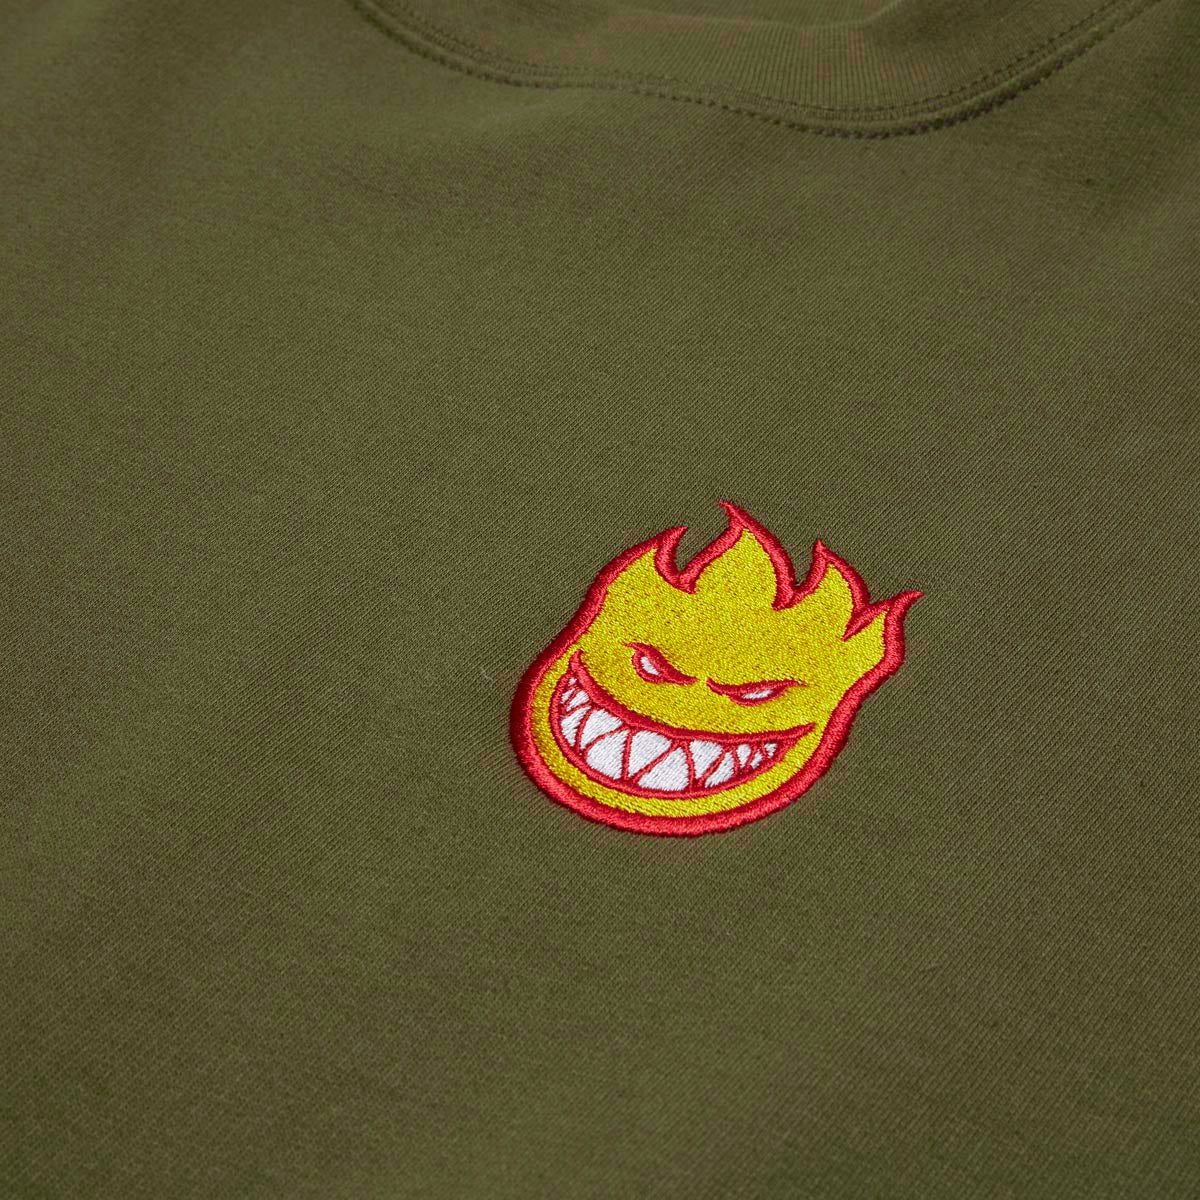 Spitfire Lil Bighead Fill Hoodie - Army/Red/Gold/White image 2